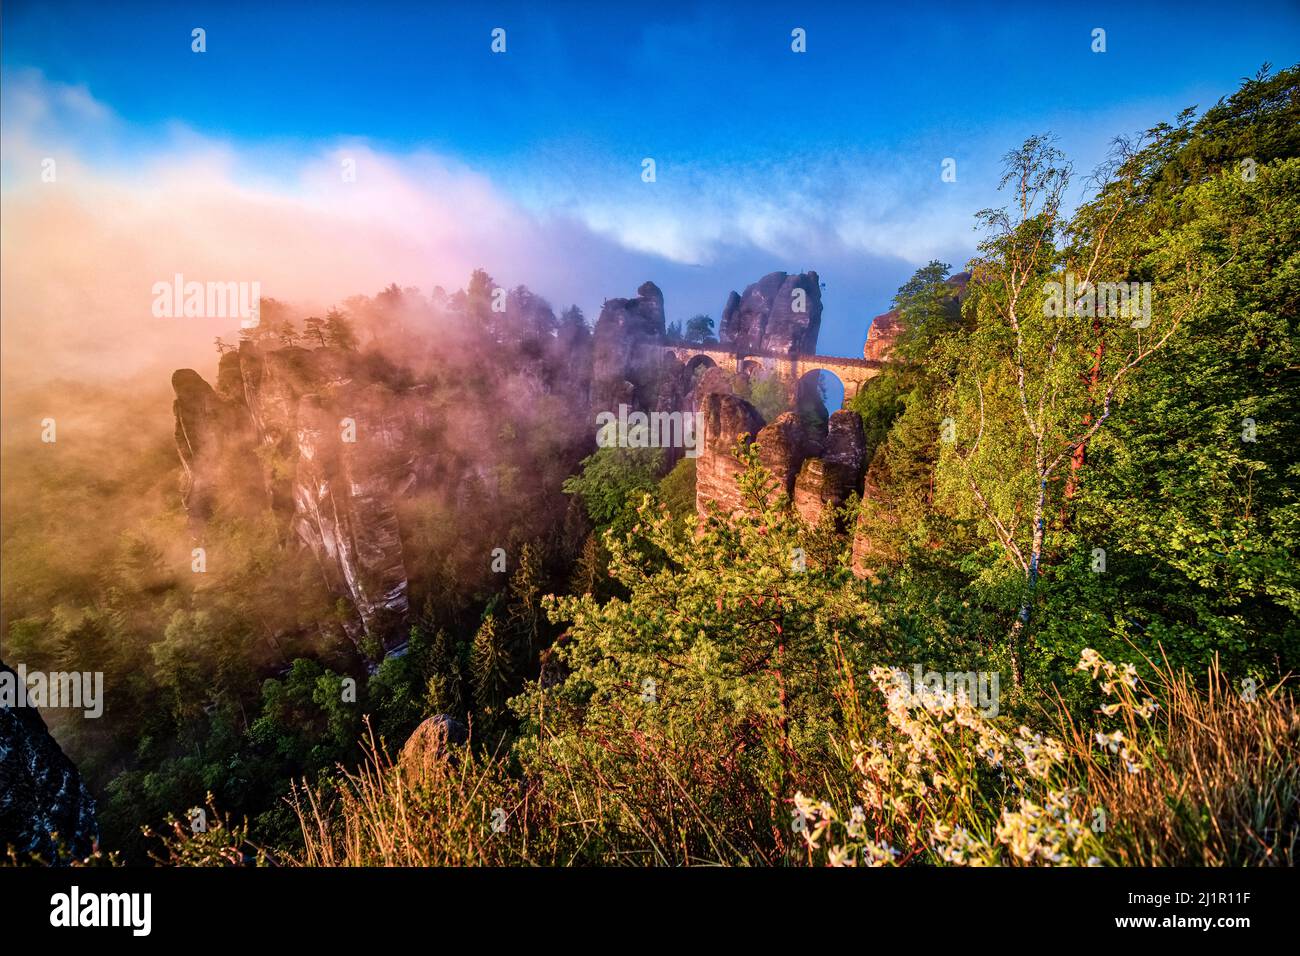 Landscape with the rock formations Felsenburg Neurathen and Bastei covered in fog in Rathen area of the Saxon Switzerland National Park at sunrise. Stock Photo